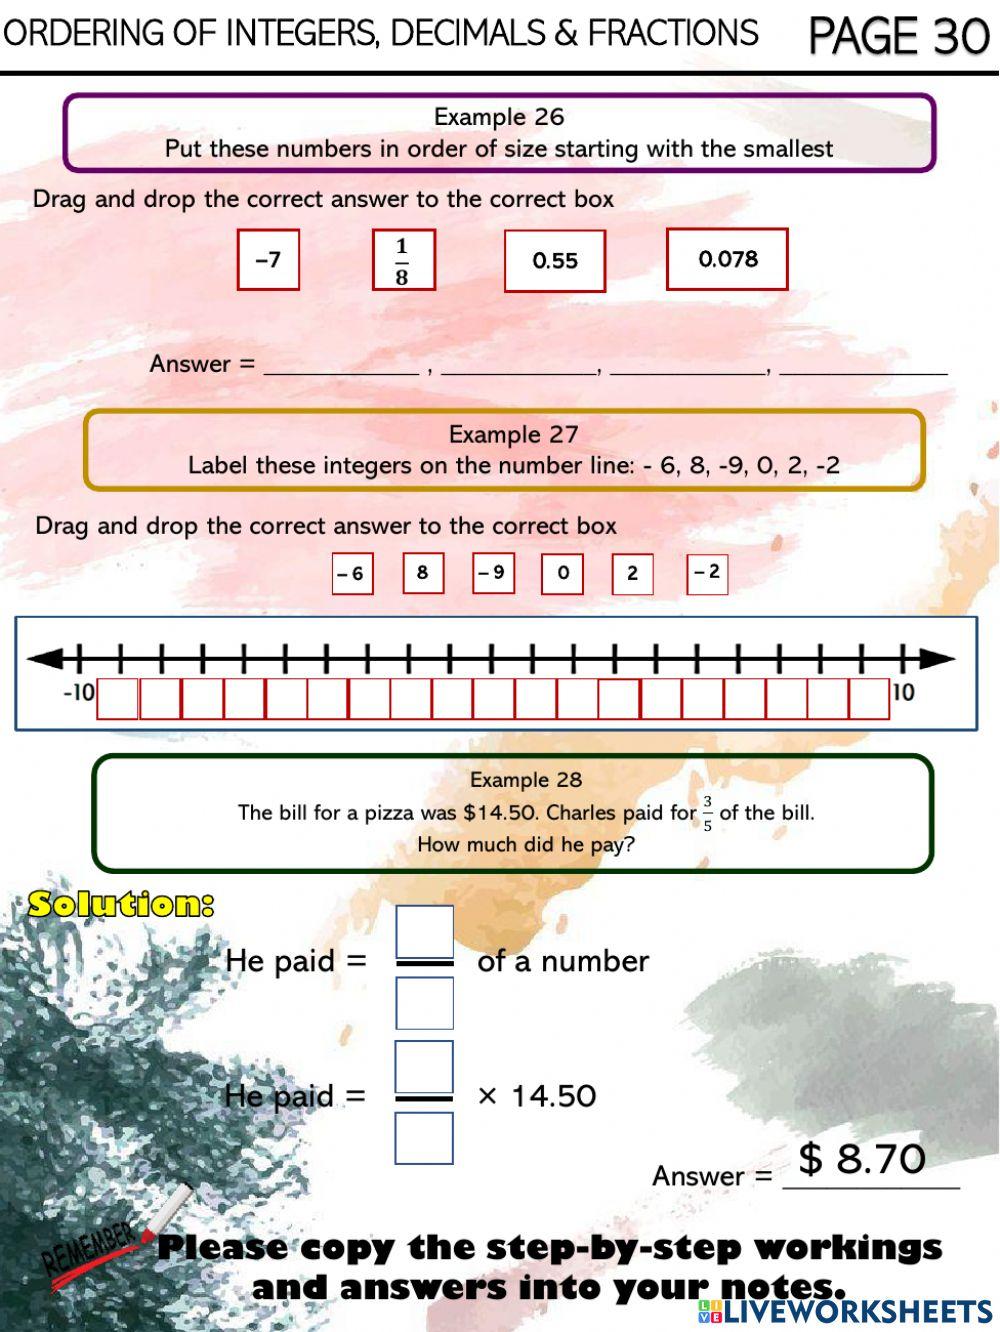 Ordering of integers, decimals and fractions